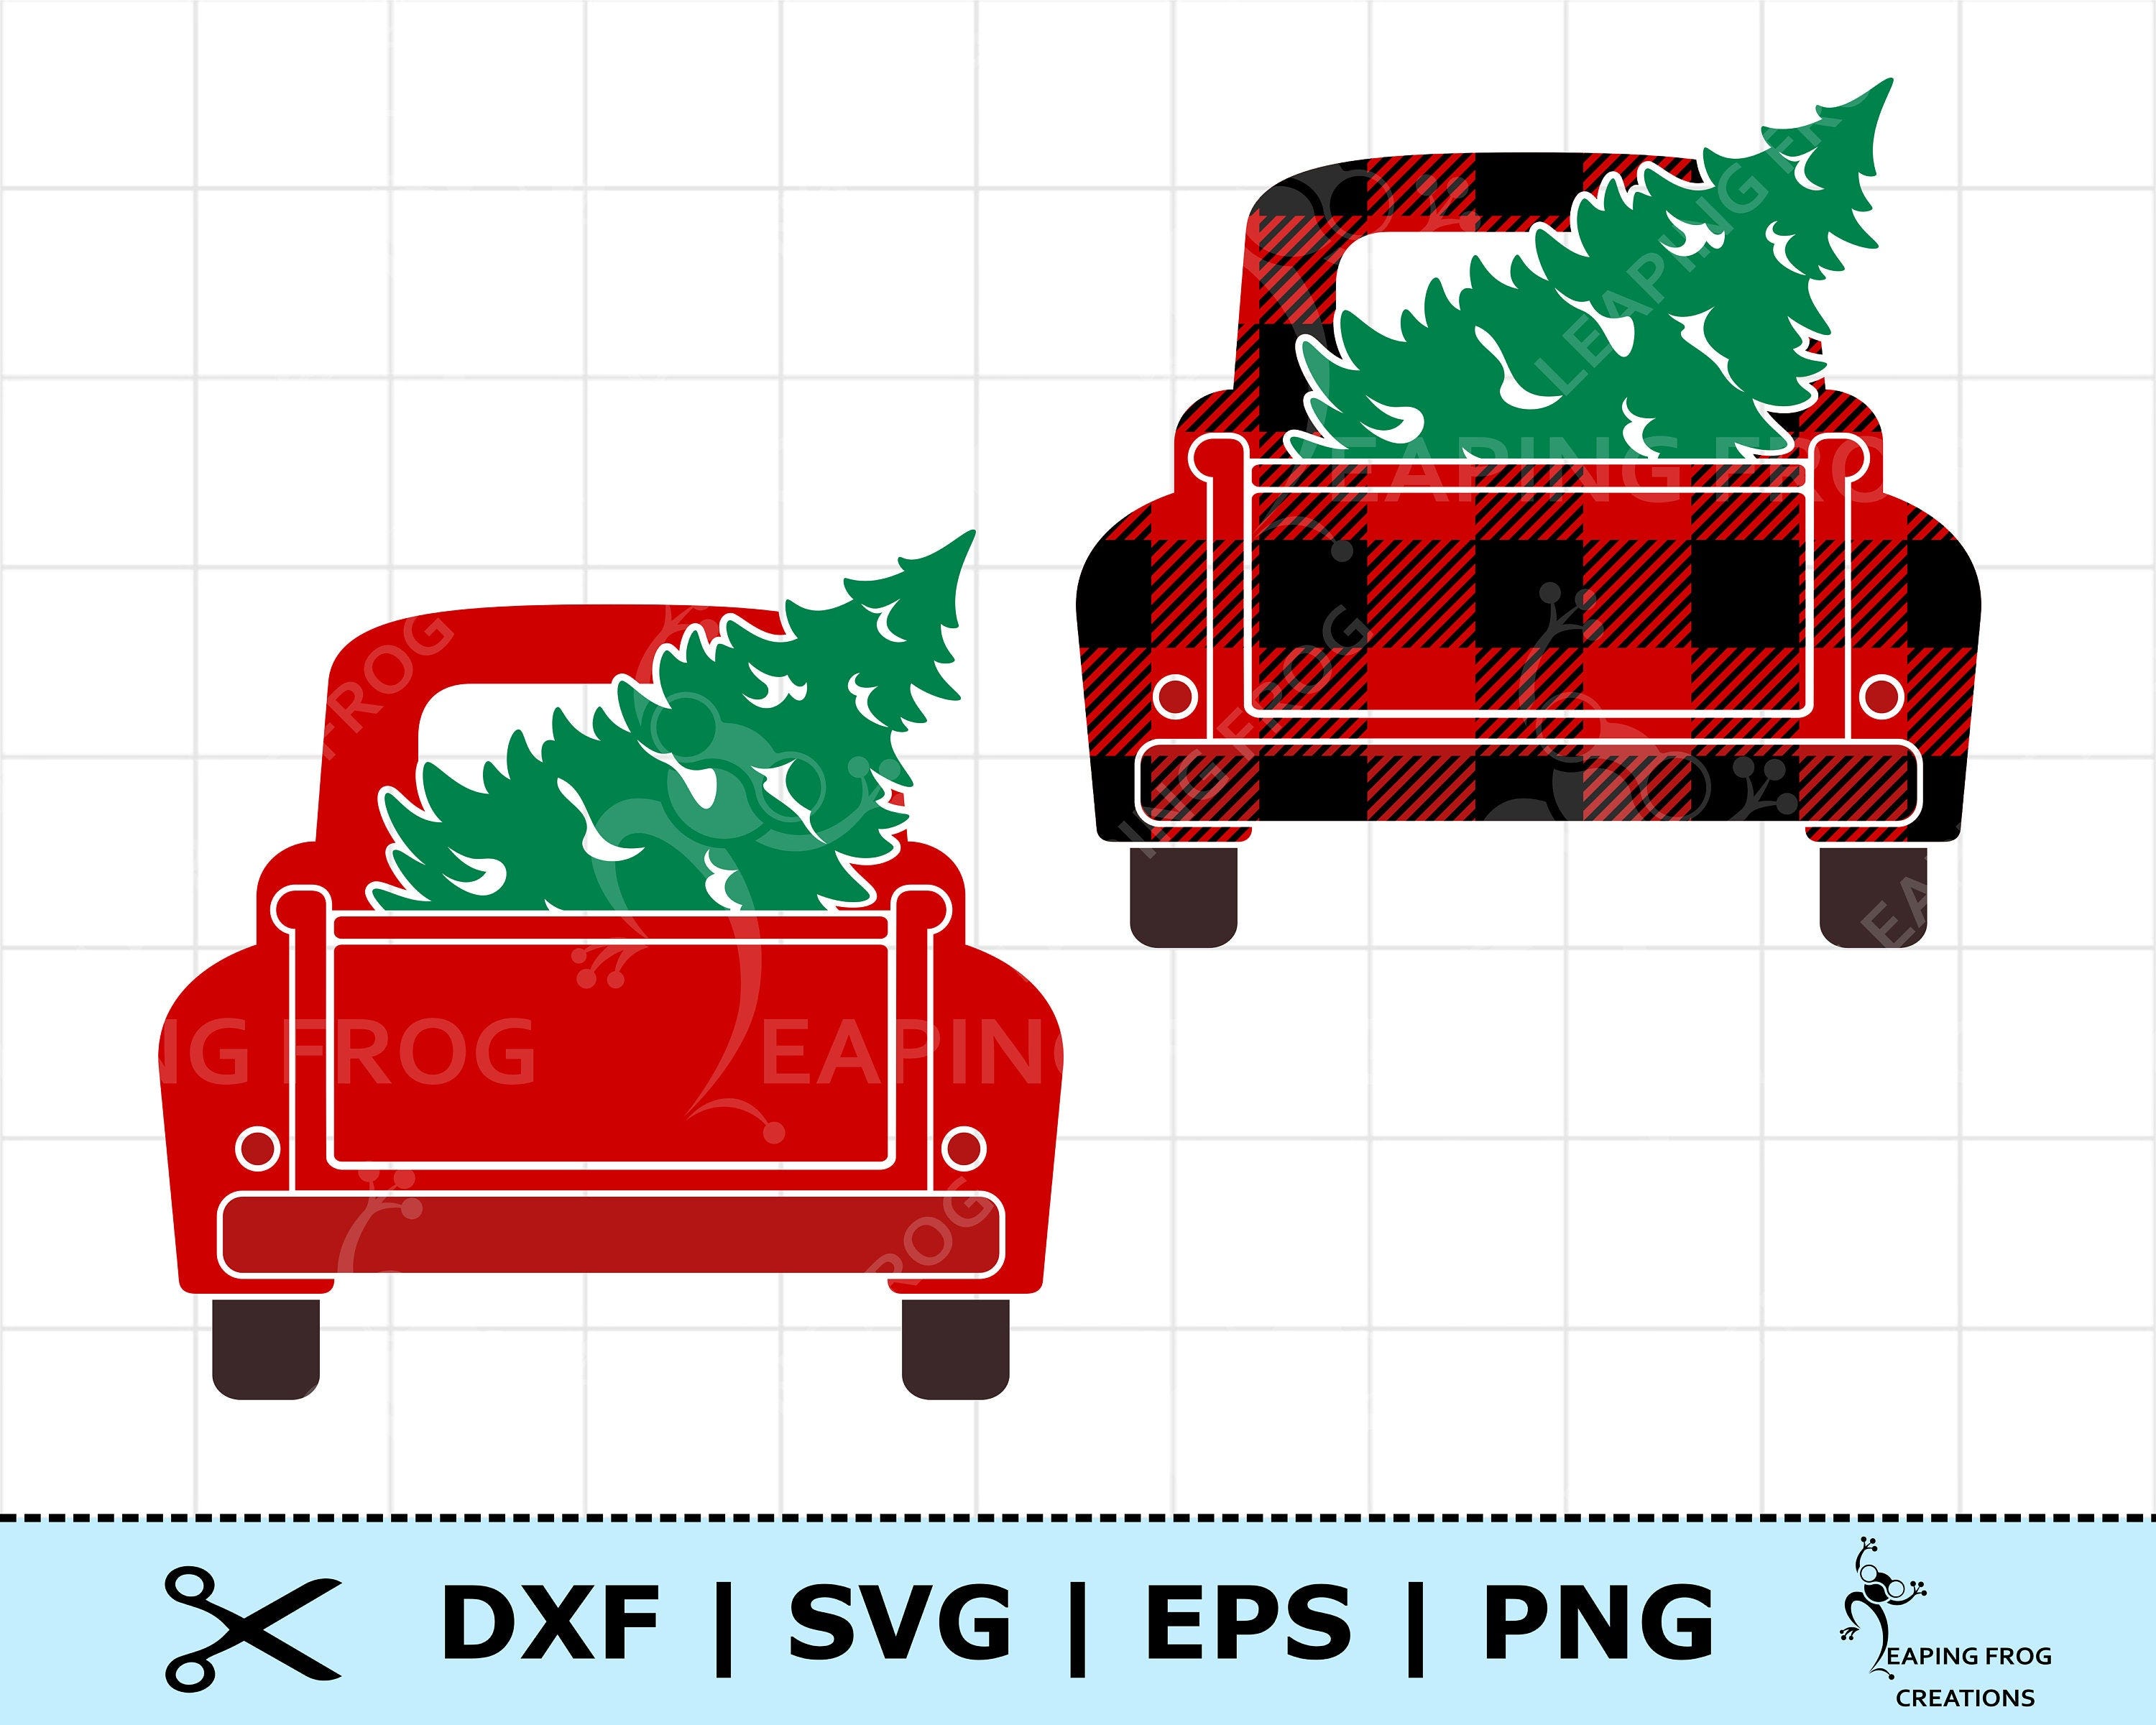 Red Buffalo Plaid Christmas Truck SVG. Plaid Christmas tree. Cricut cut files, layered. Silhouette. Red Truck. Green Tree. clipart. dxf png